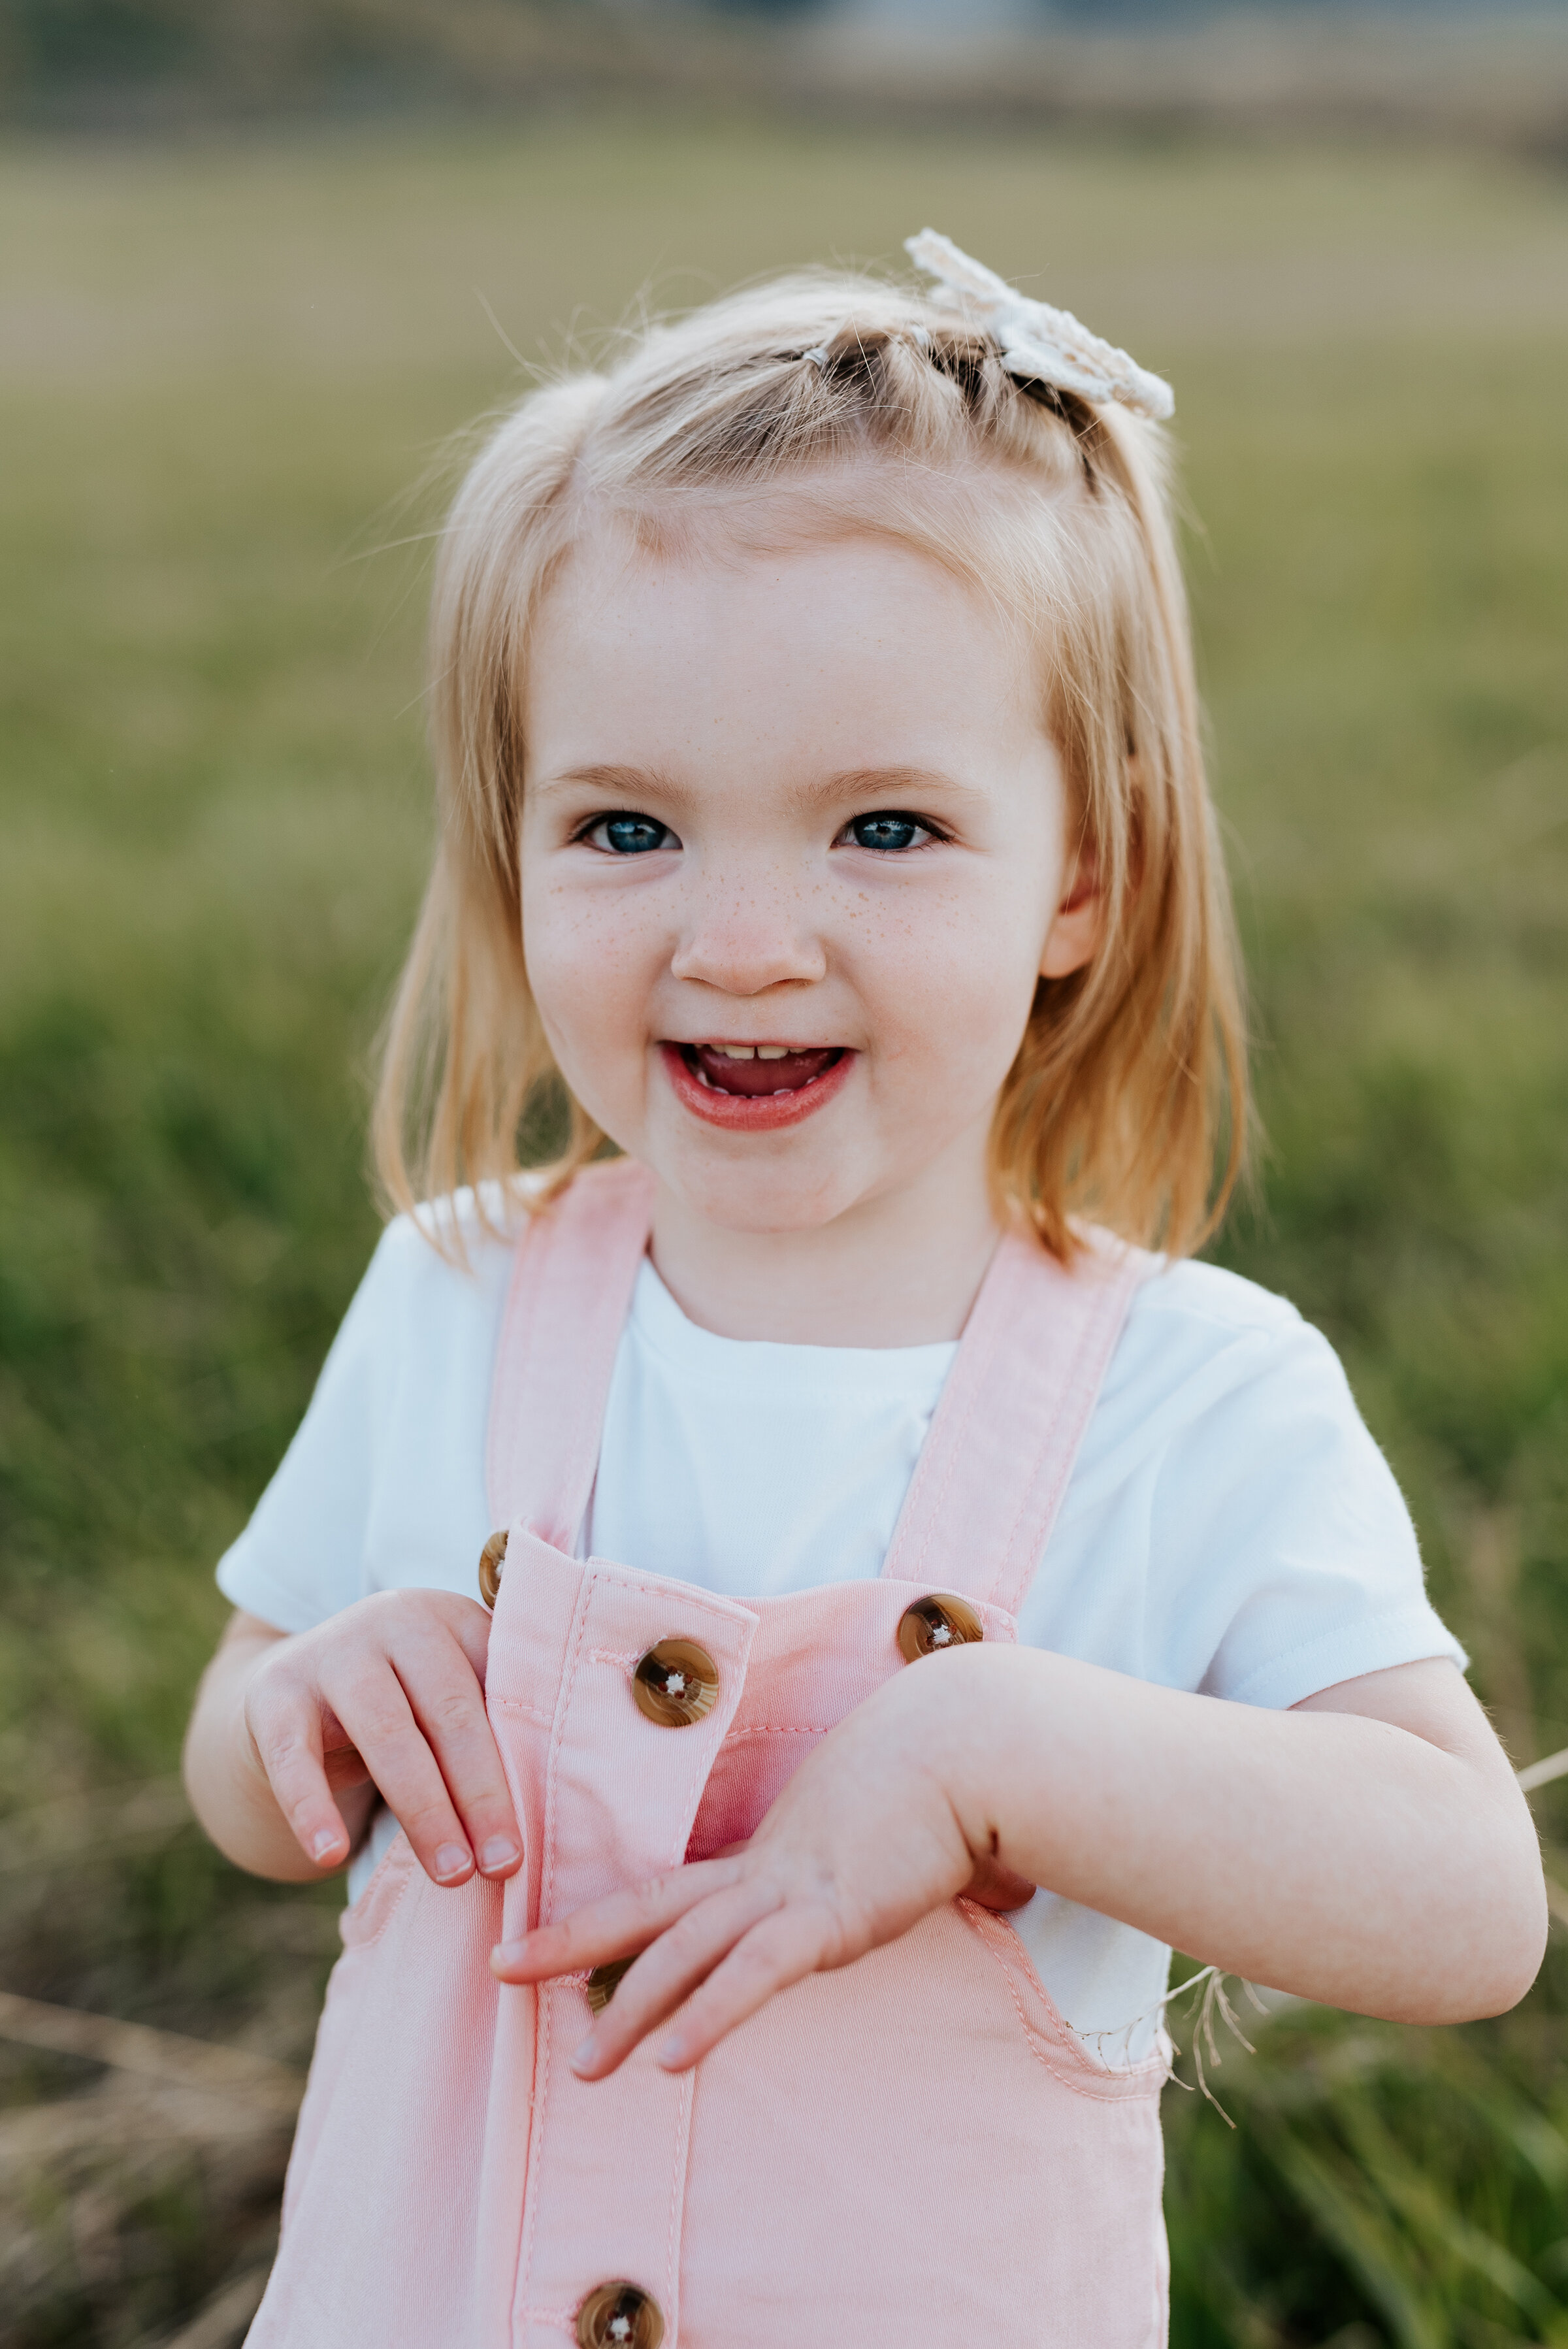  Adorable little girl's smile is captured during a family photoshoot in Logan Utah. Keepsake photography ideas childhood photos pink overalls family outfit ideas child poses for family photos candid family photos utah based photographer #utahfamilyphotos #utahphotographer #familyphotographer #familyoutfitideas #loganutah #loganutahphotographer #saycheese #kristialyse #kristialysephotography #pinterestworthyphotos 